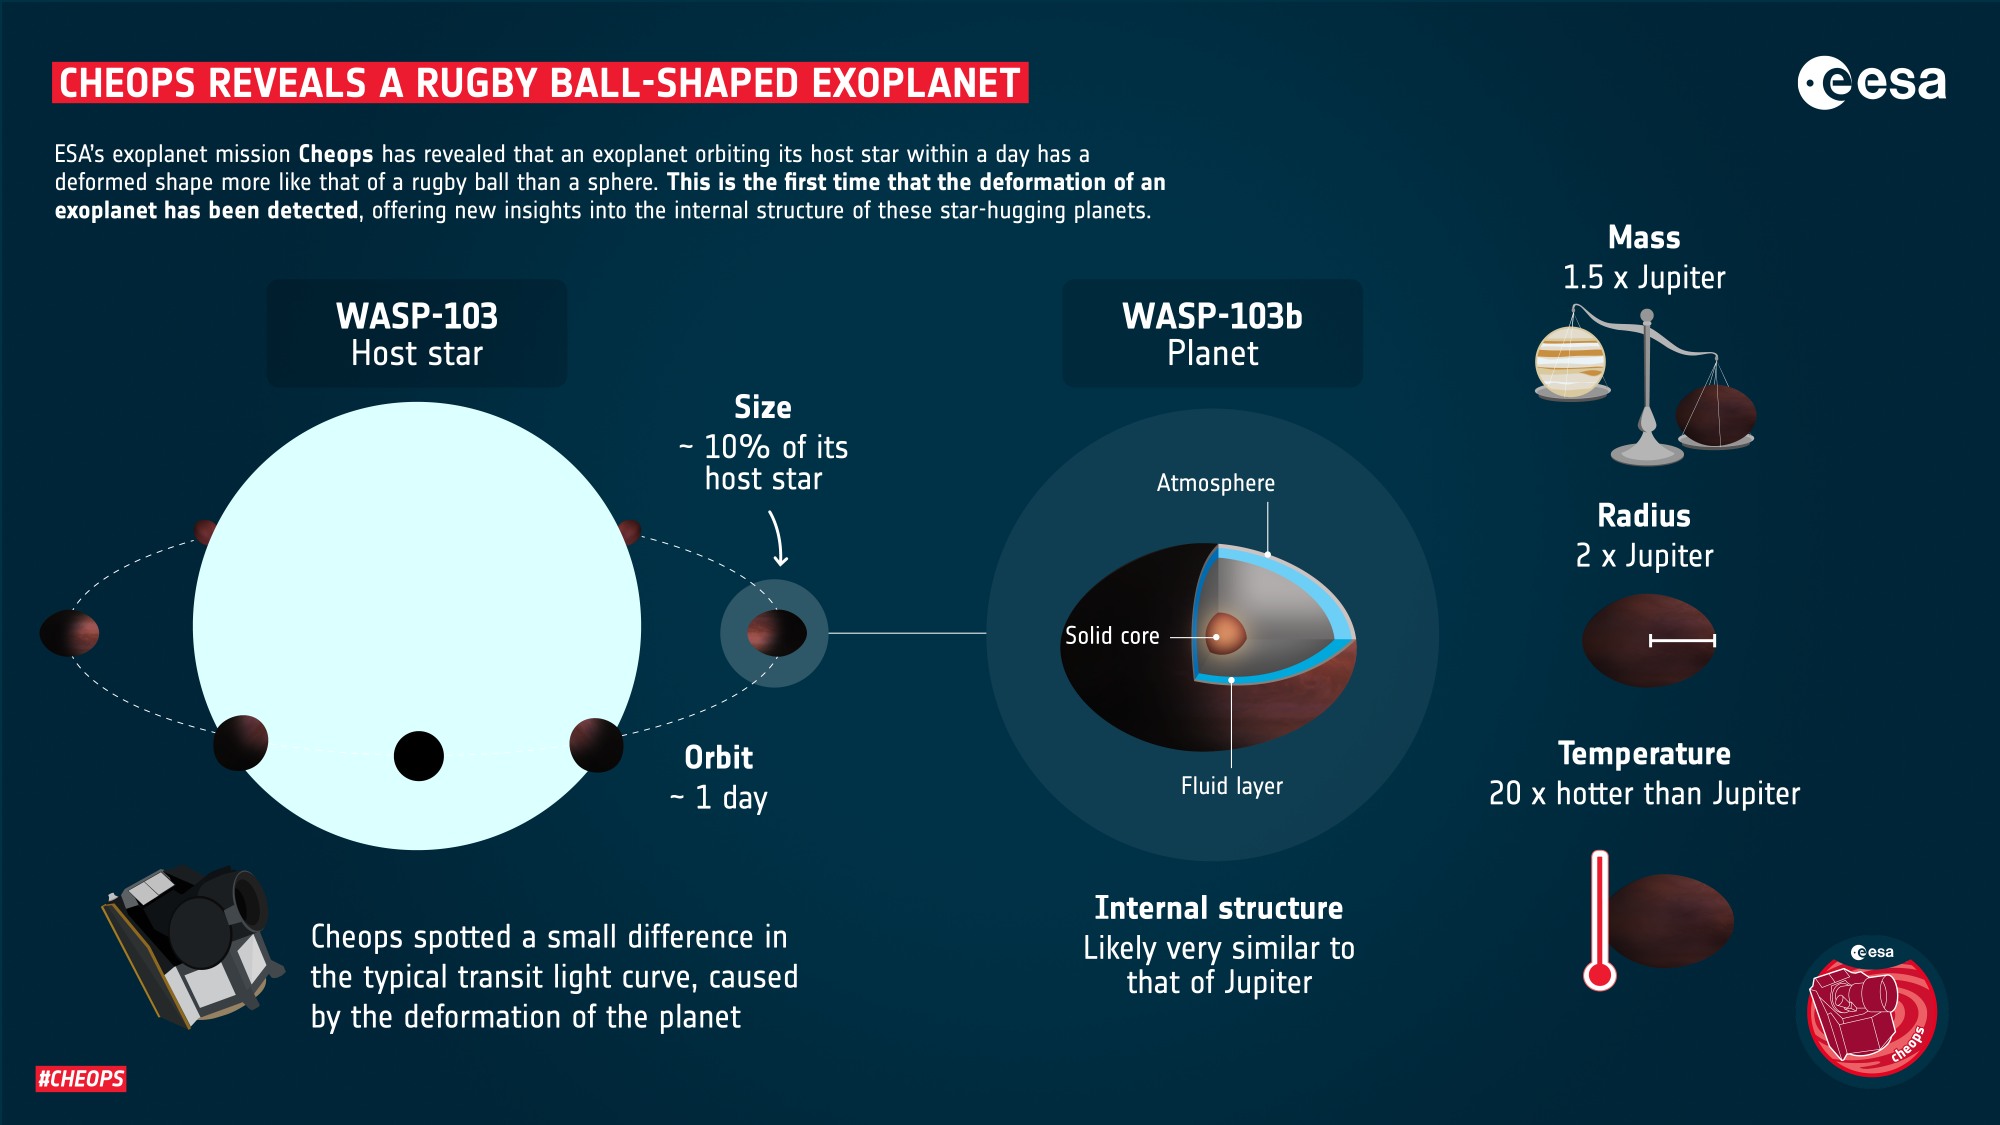 A diagram showing rugby-shaped exoplanet WASP-103b.